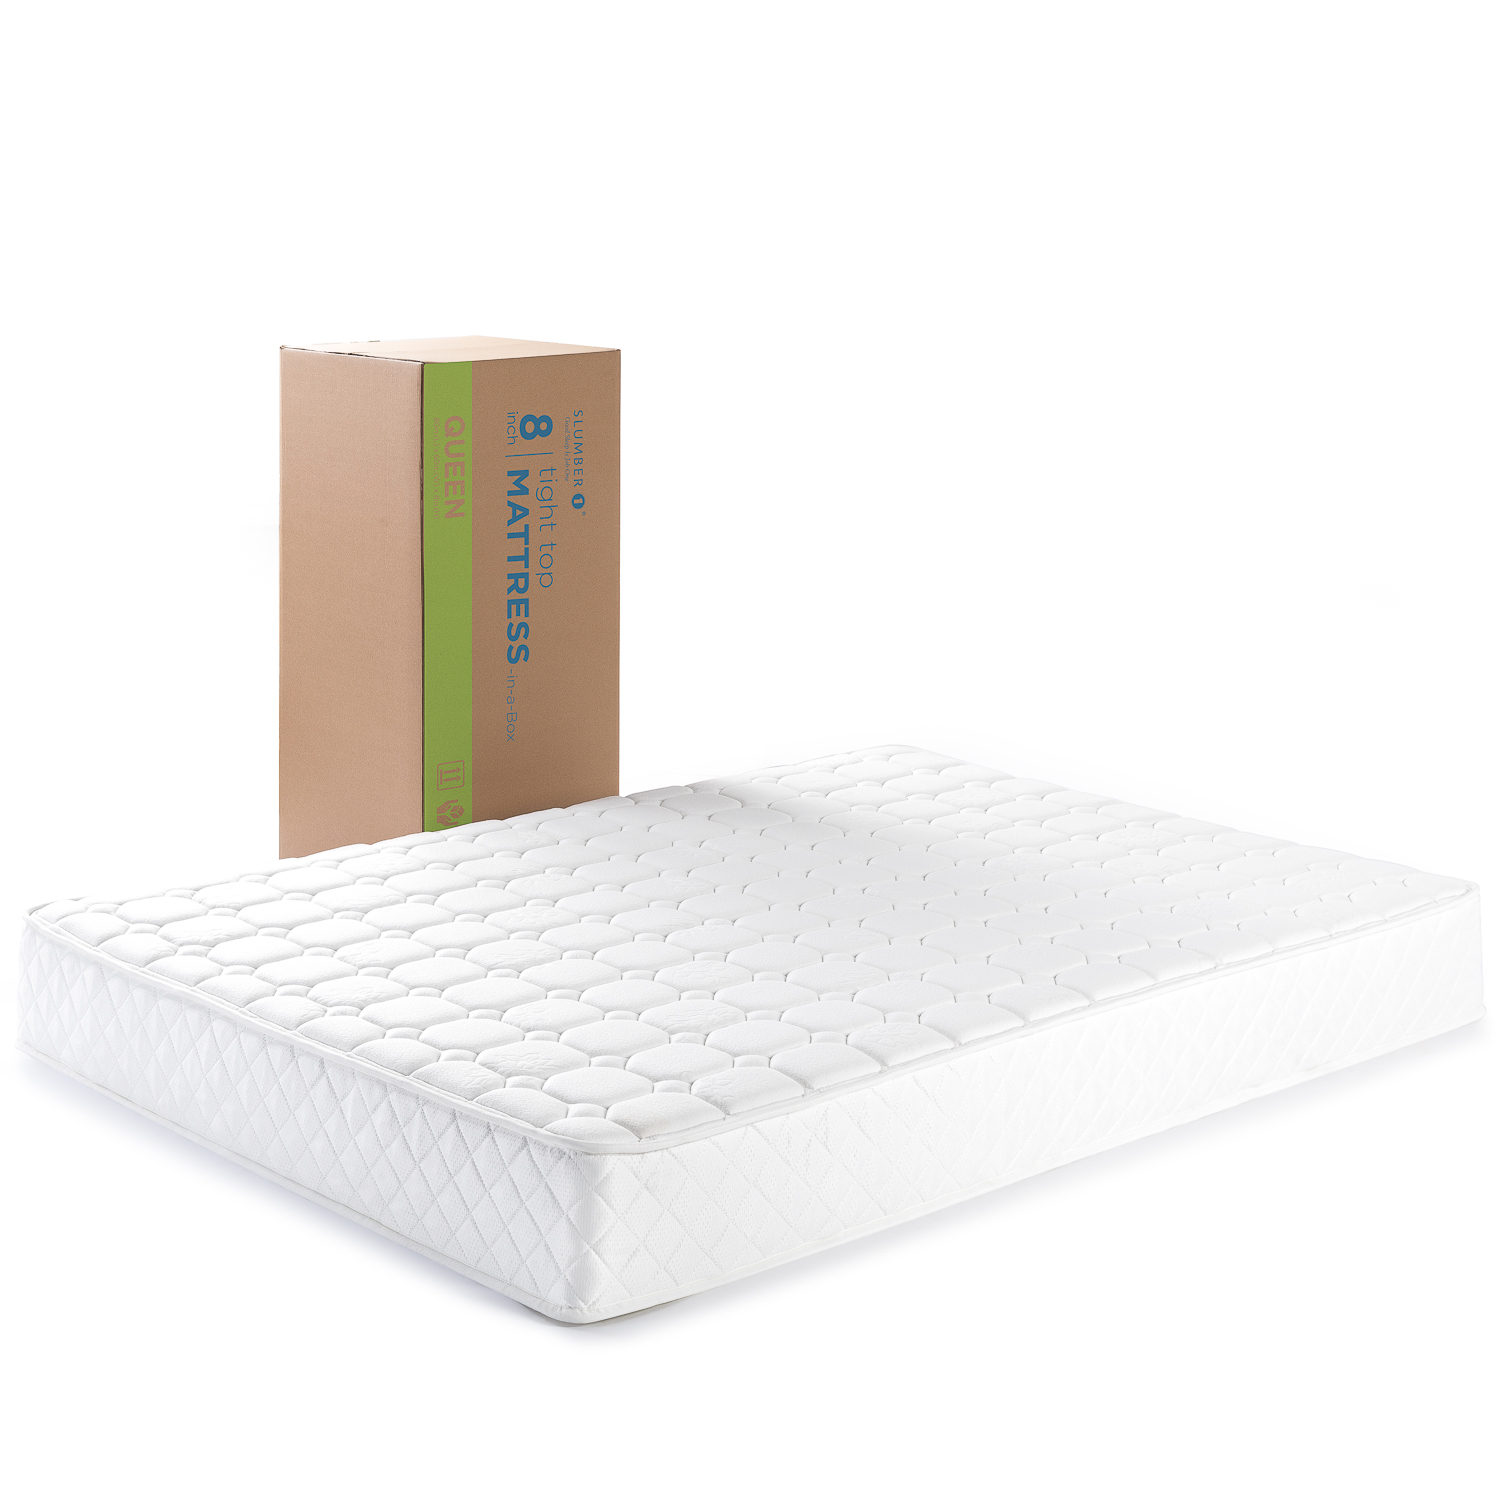 8" Quilted Hybrid of Comfort Foam and Pocket Spring Mattress, Full - image 4 of 5